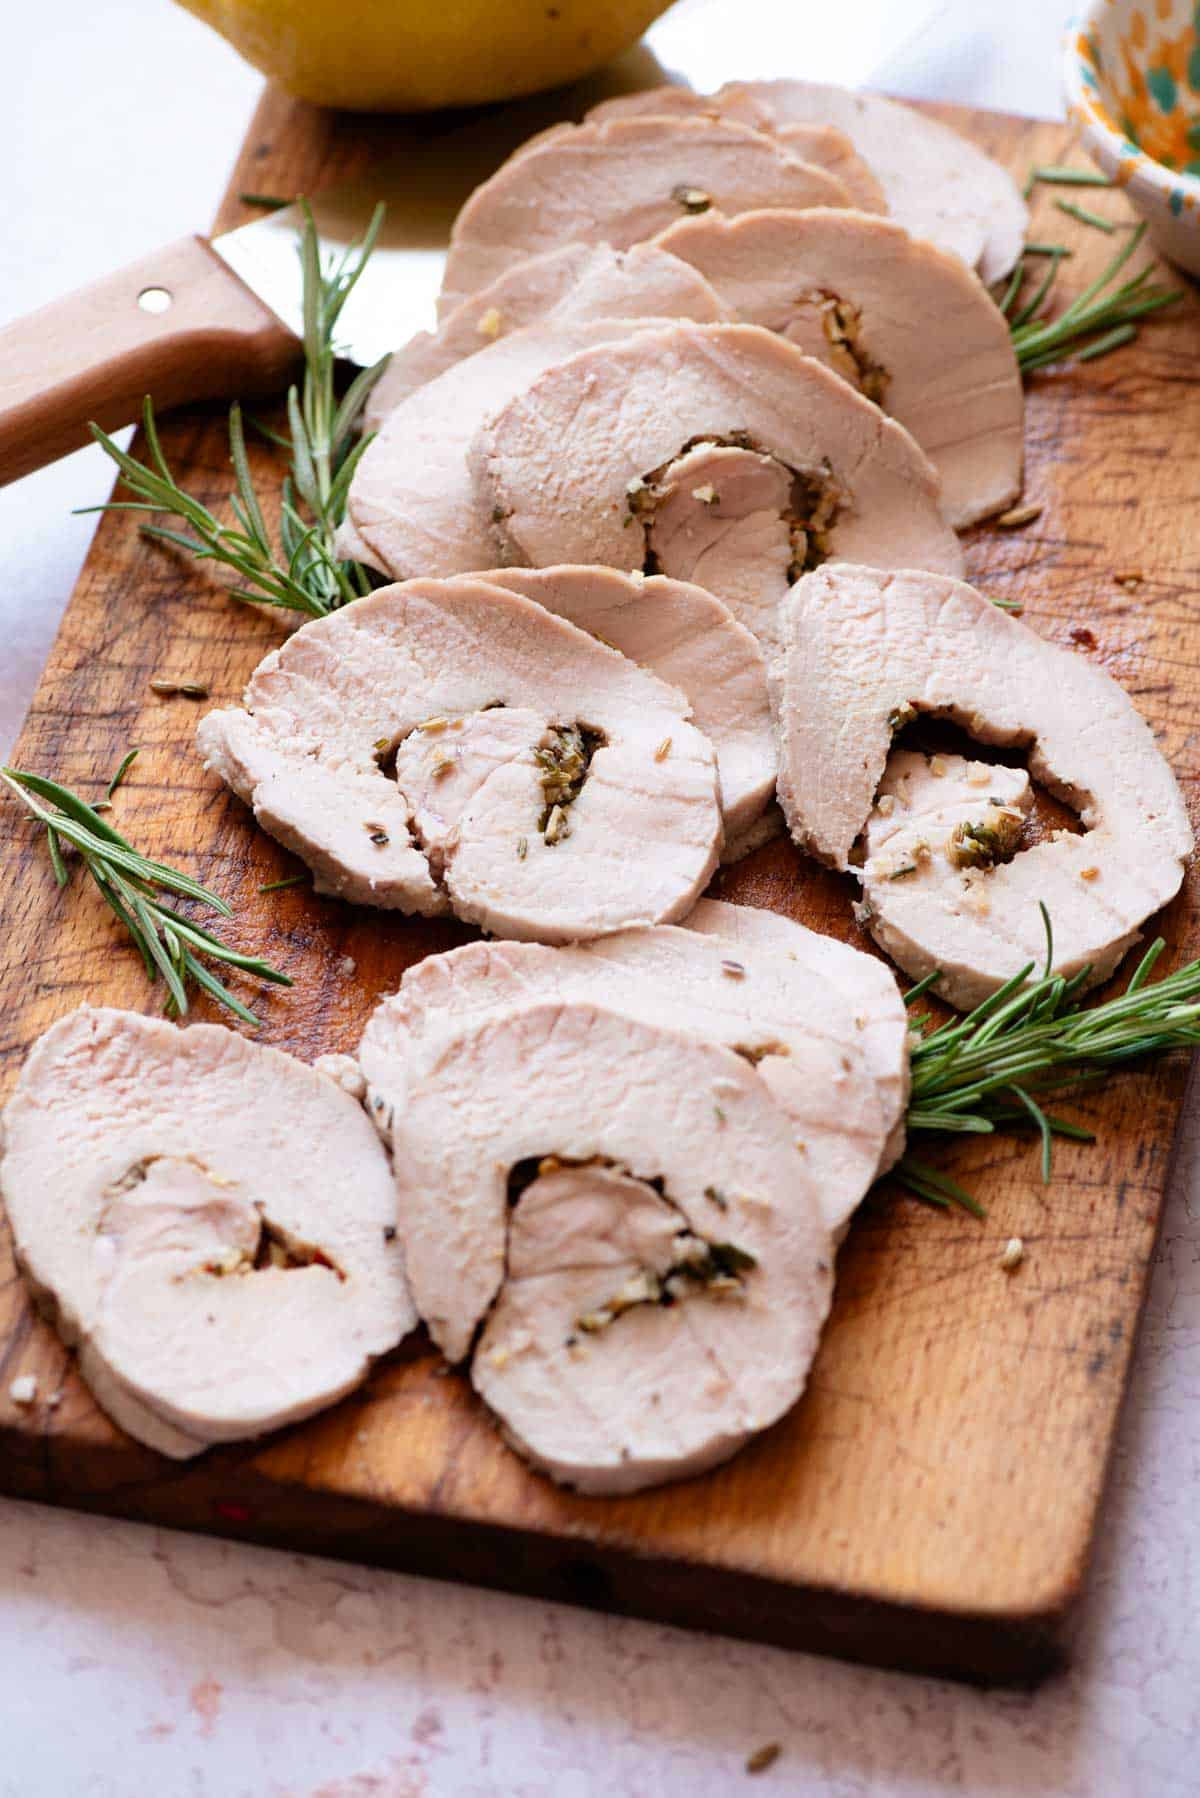 Slices of Italian roast pork on a wooden chopping board with a large knife and lemon at the side.